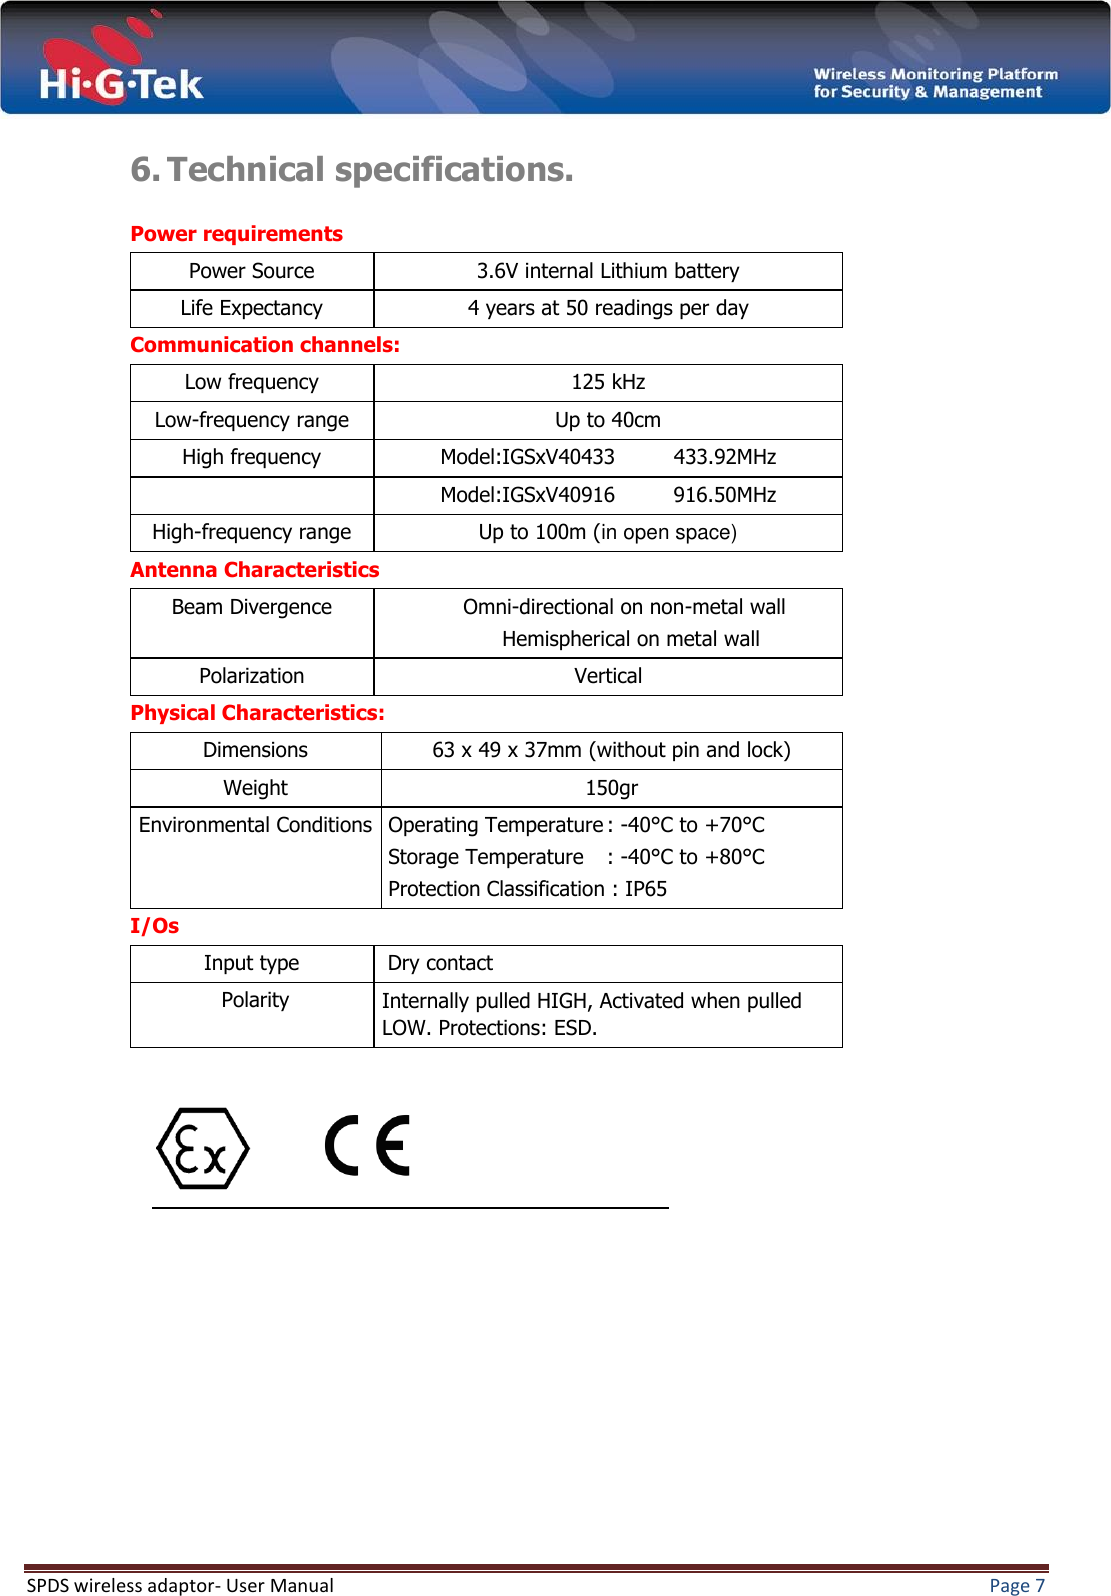  SPDS wireless adaptor- User Manual  Page 7   6. Technical specifications.  Power requirements Power Source 3.6V internal Lithium battery Life Expectancy 4 years at 50 readings per day Communication channels: Low frequency 125 kHz Low-frequency range Up to 40cm High frequency Model:IGSxV40433         433.92MHz  Model:IGSxV40916         916.50MHz High-frequency range Up to 100m (in open space) Antenna Characteristics Beam Divergence      Omni-directional on non-metal wall        Hemispherical on metal wall Polarization Vertical Physical Characteristics: Dimensions 63 x 49 x 37mm (without pin and lock) Weight 150gr Environmental Conditions  Operating Temperature : -40°C to +70°C  Storage Temperature  : -40°C to +80°C  Protection Classification : IP65 I/Os Input type   Dry contact      Polarity Internally pulled HIGH, Activated when pulled LOW. Protections: ESD.                           